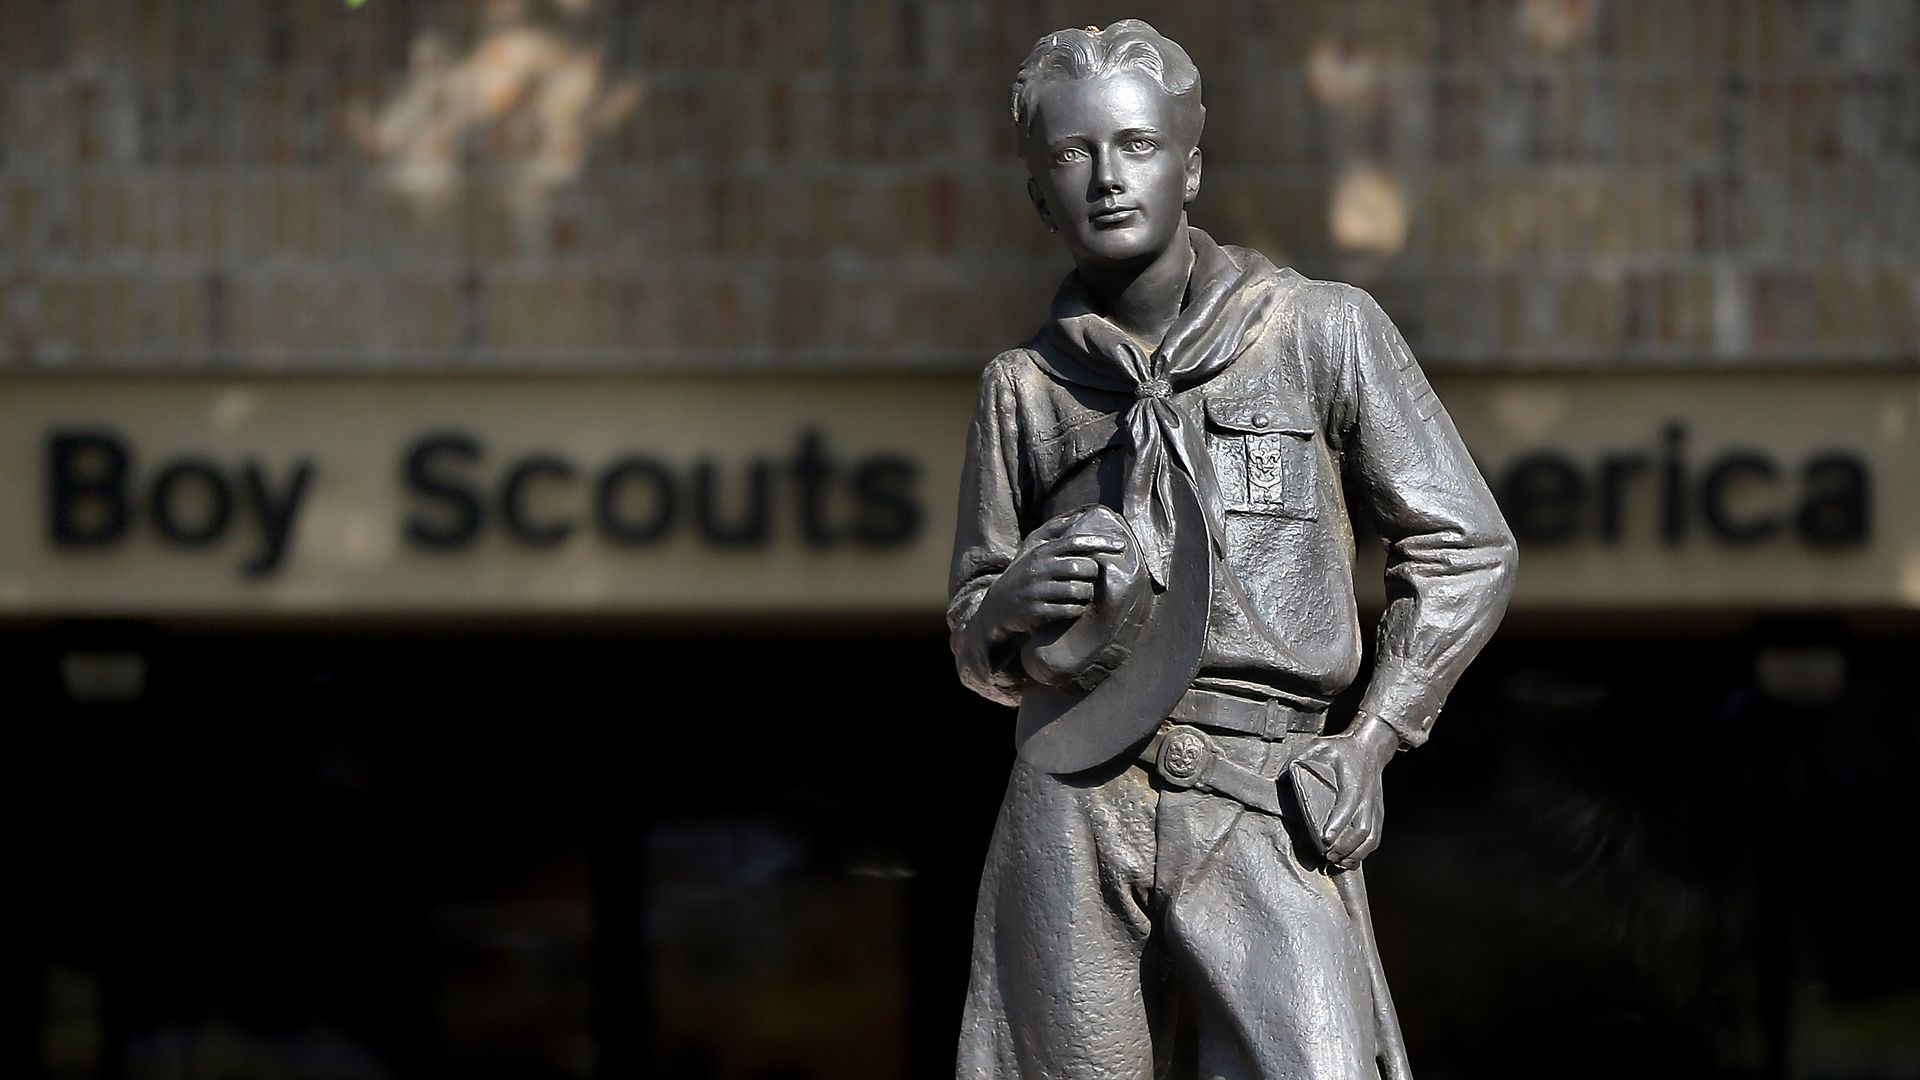 A statue of a Boy Scout with his hat in his hands